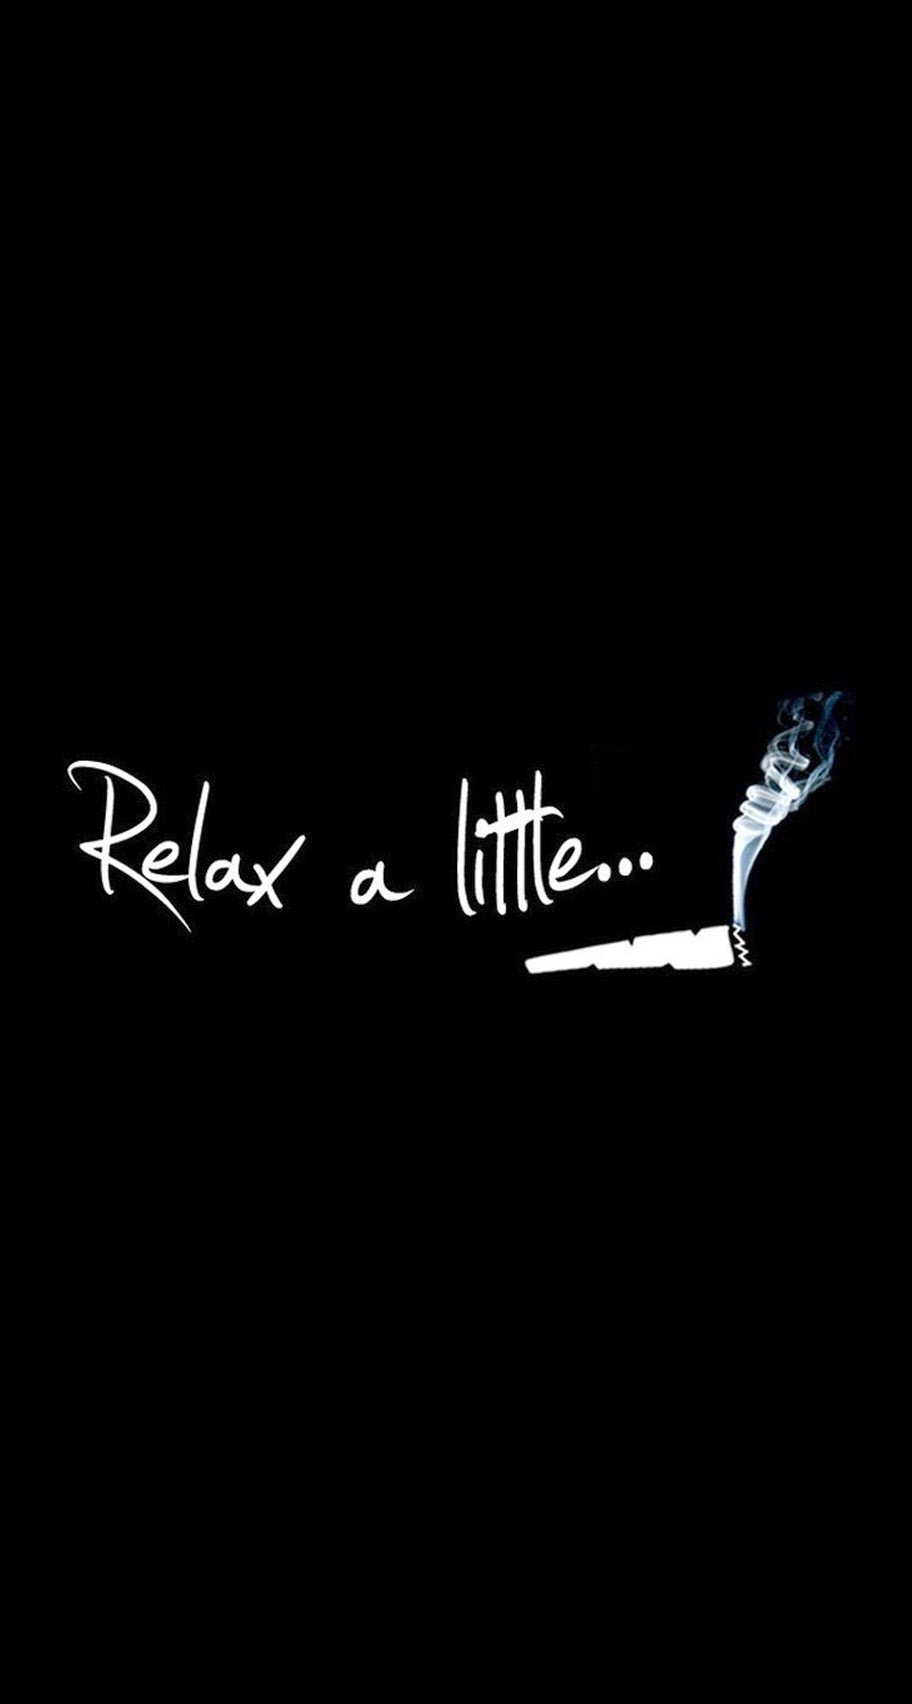 Relax-A-Little-Smoke-Weed-iPhone-6-Plus-HD-Wallpaper